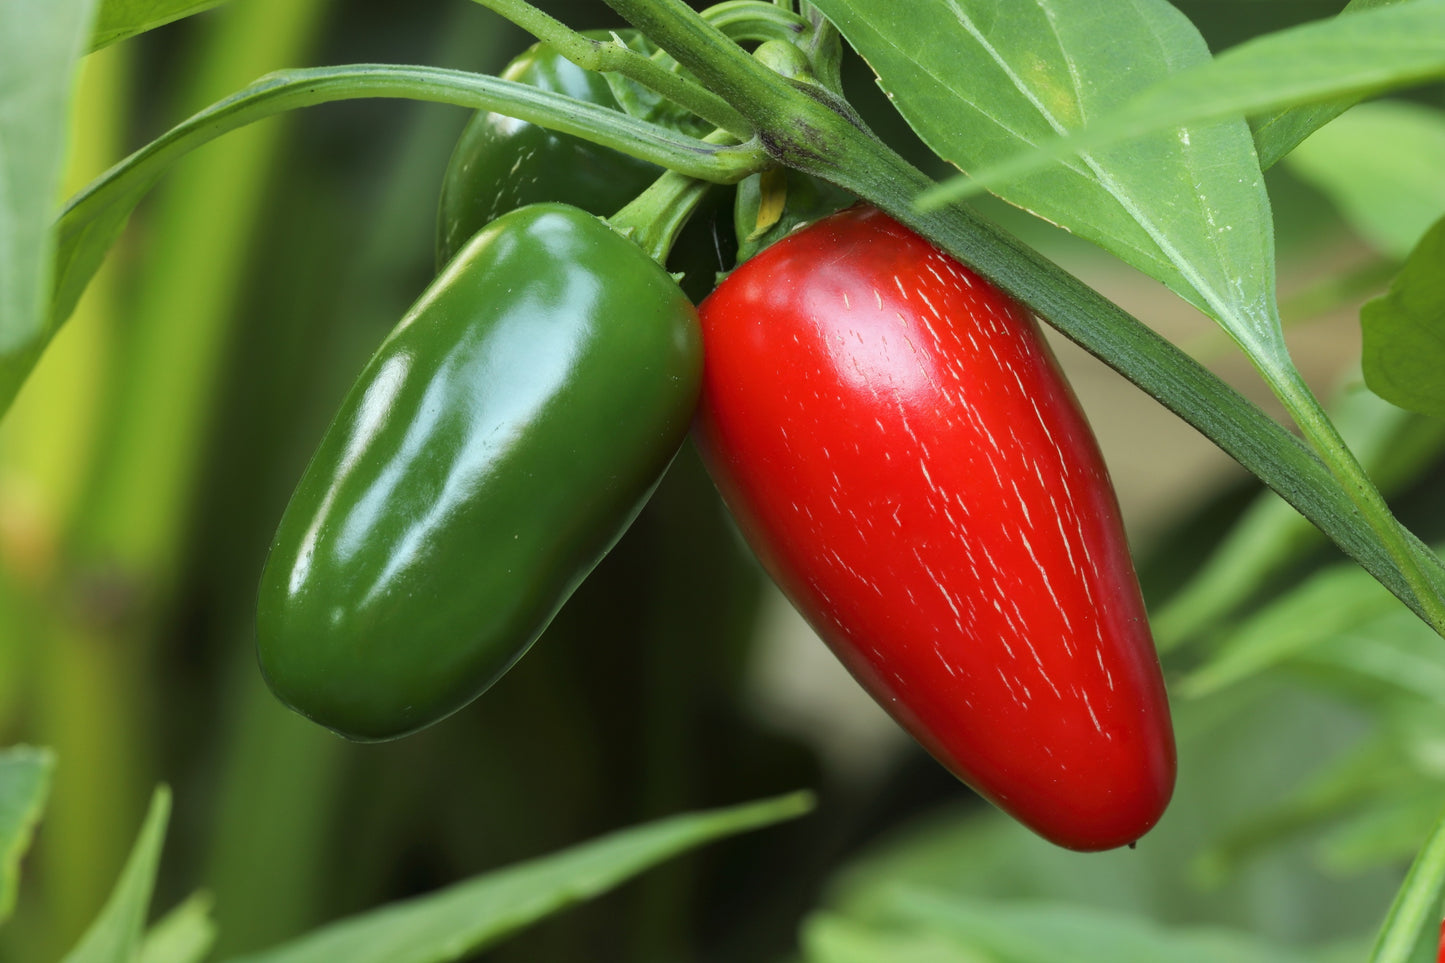 400 EARLY JALAPENO PEPPER Green Medium Hot Capsicum Annuum Mexican Chili Vegetable Seeds